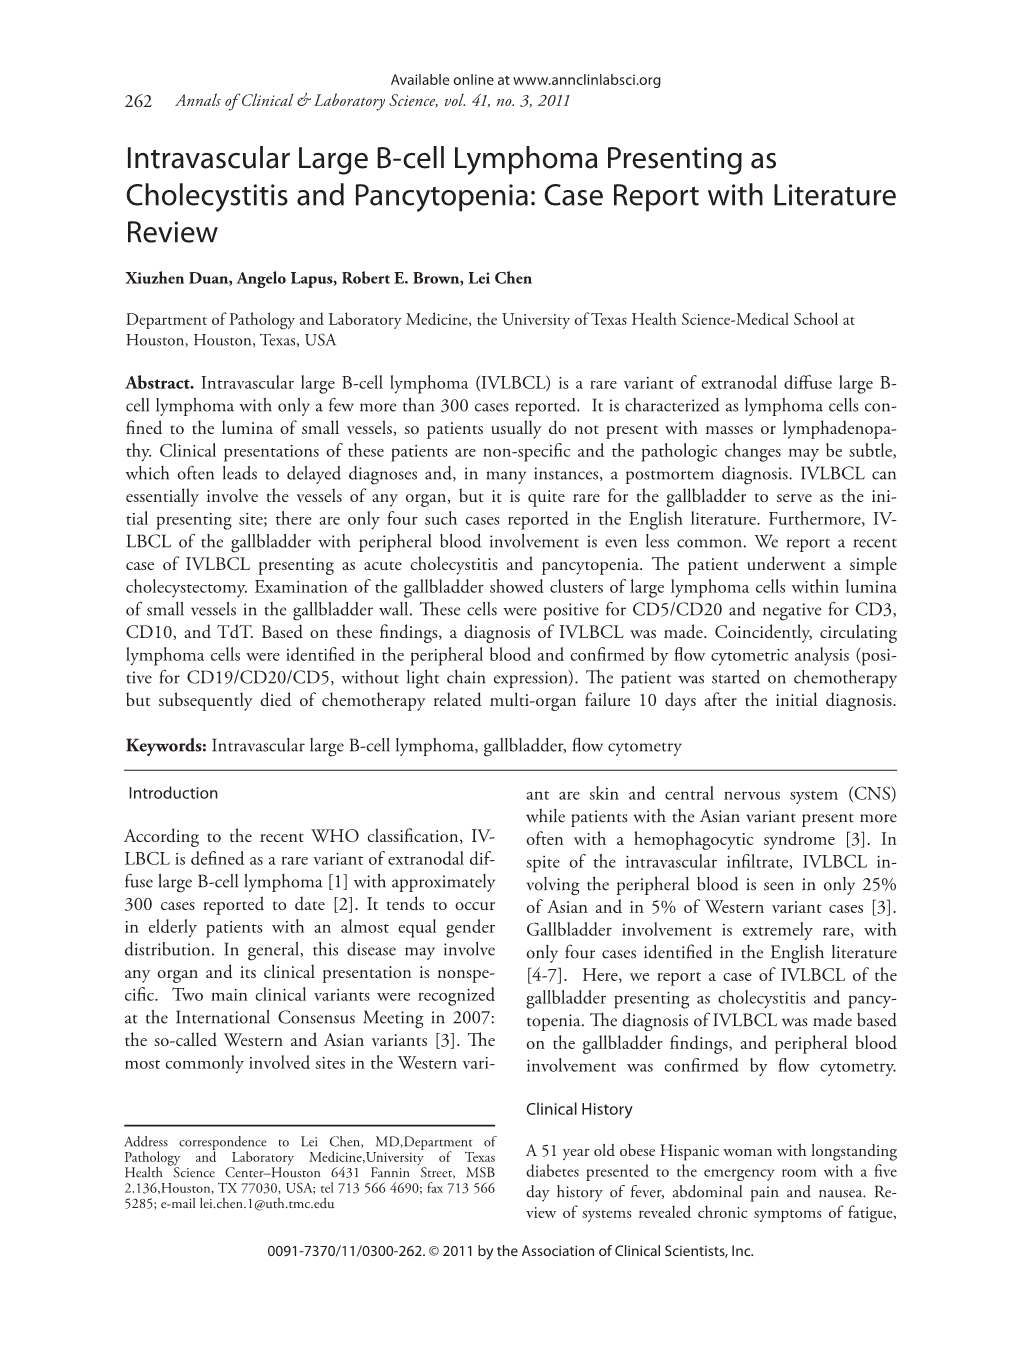 Intravascular Large B-Cell Lymphoma Presenting As Cholecystitis and Pancytopenia: Case Report with Literature Review